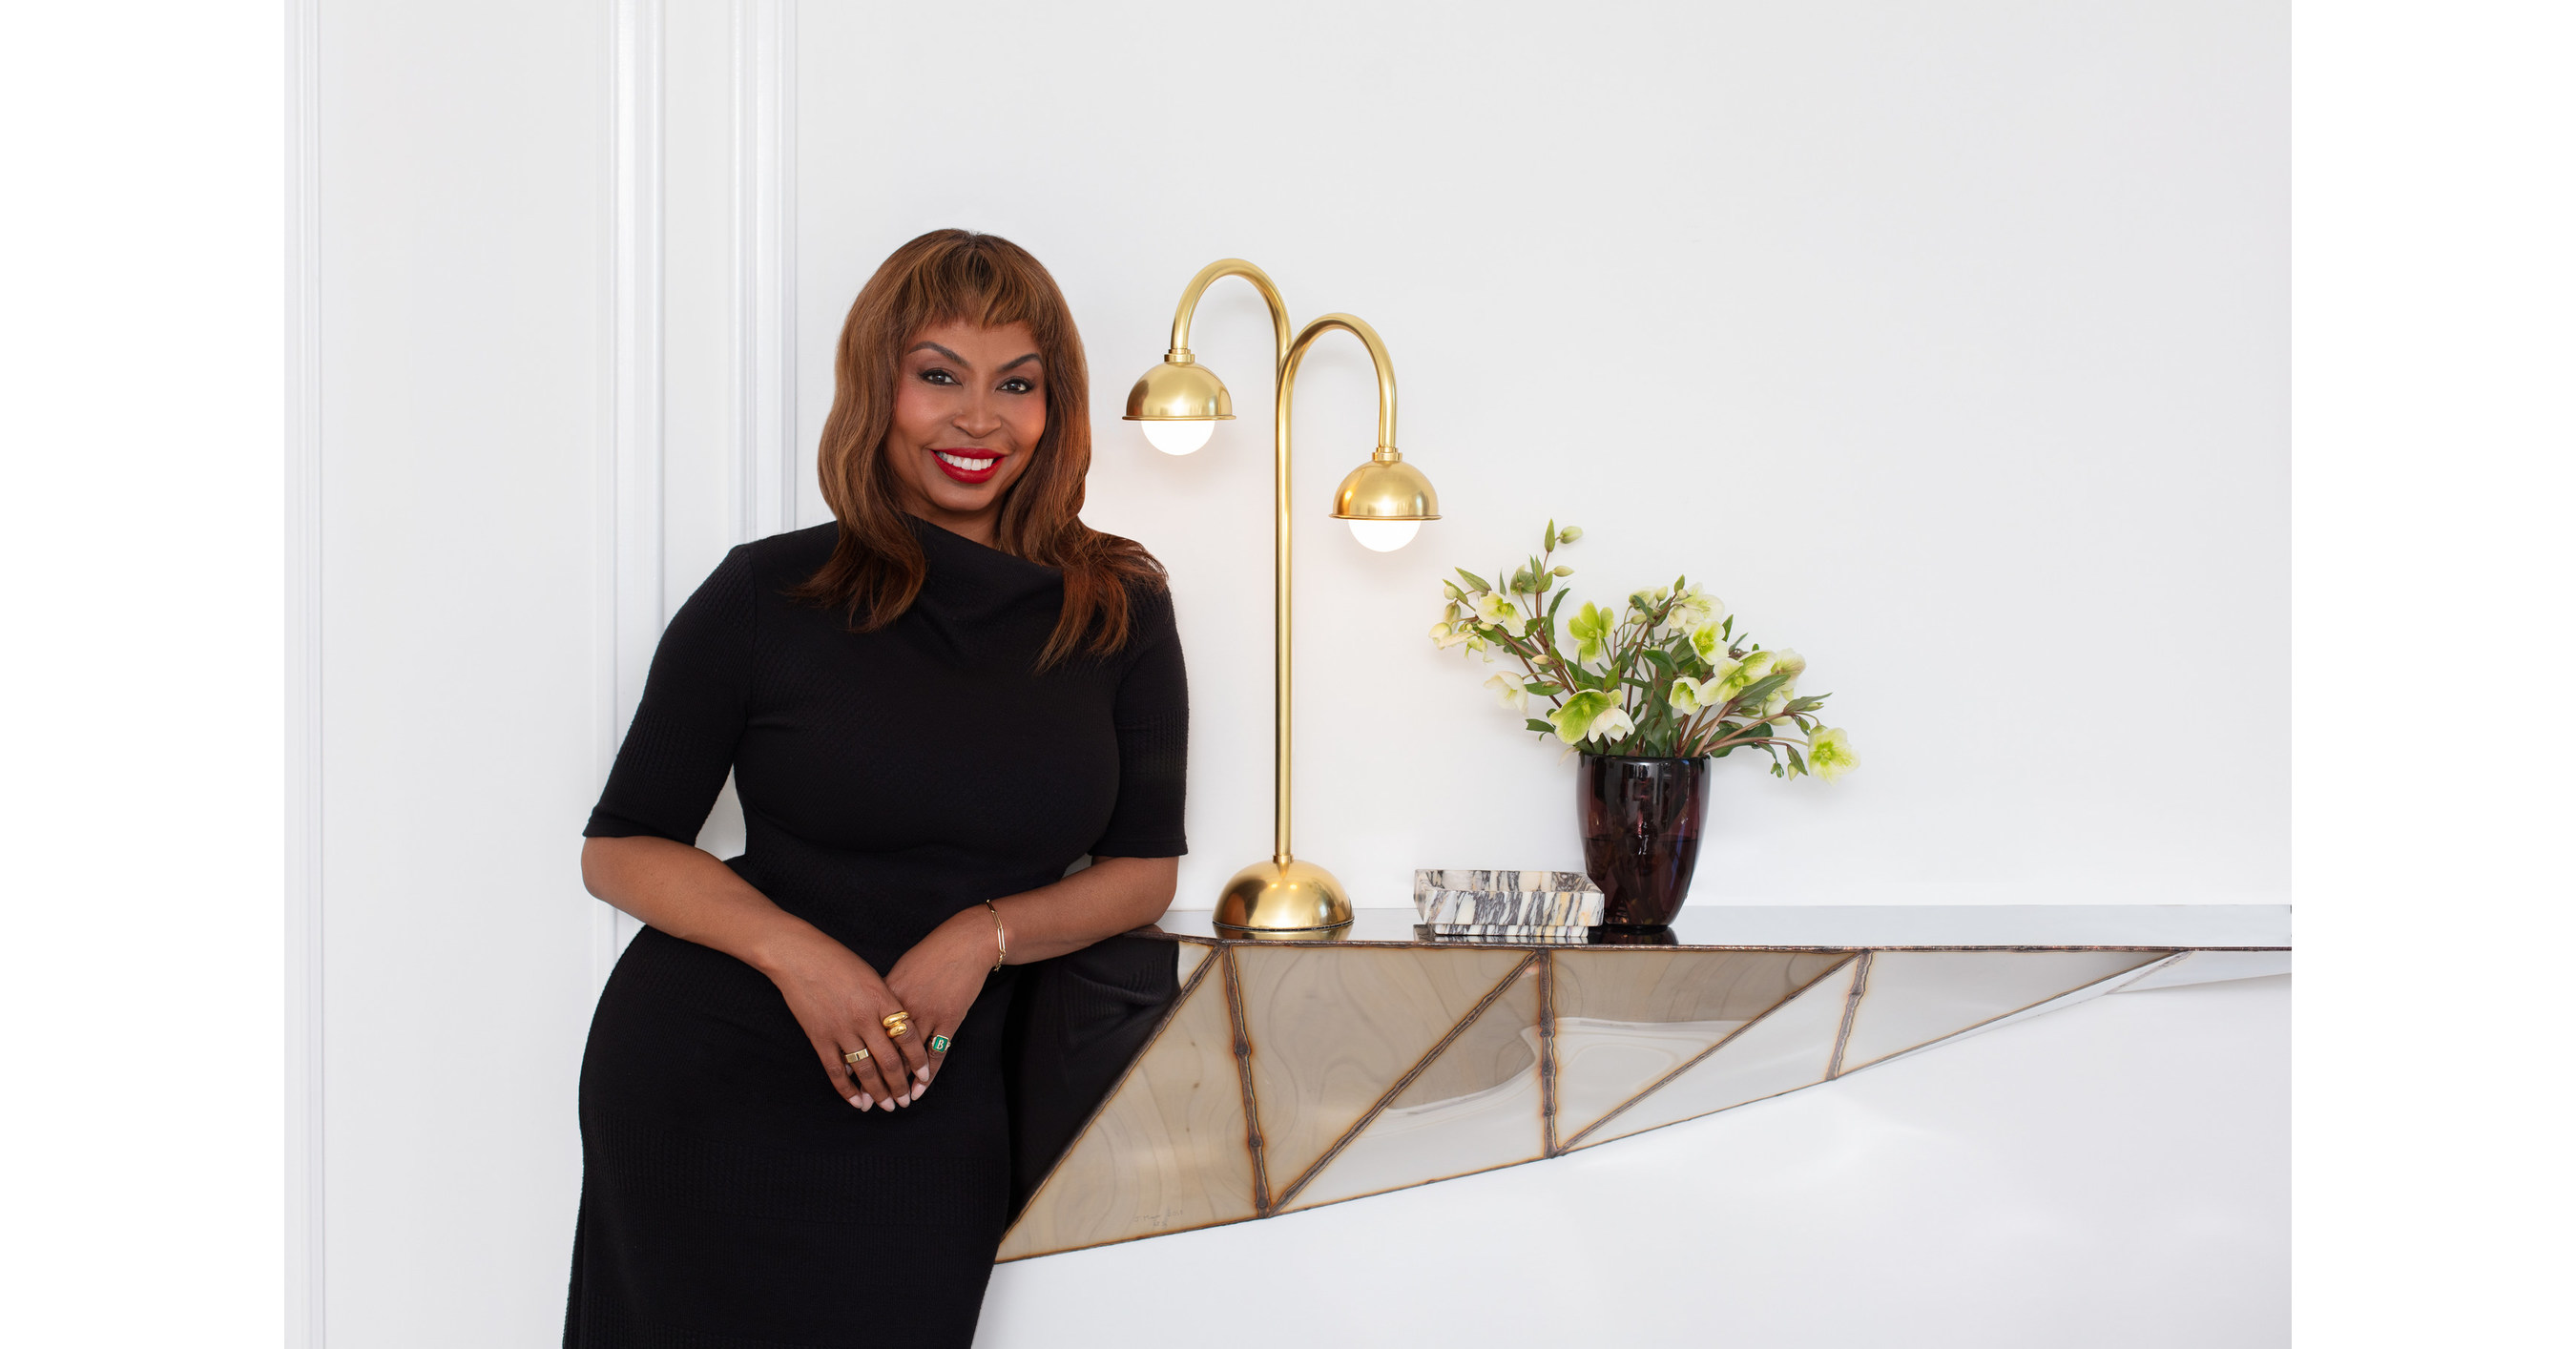 MITCHELL GOLD + BOB WILLIAMS HOME FURNISHINGS EXPANDS COLLABORATION WITH CELEBRITY INTERIOR DESIGNER BRIGETTE ROMANEK BY ADDING VINTAGE MODERN LIGHTING